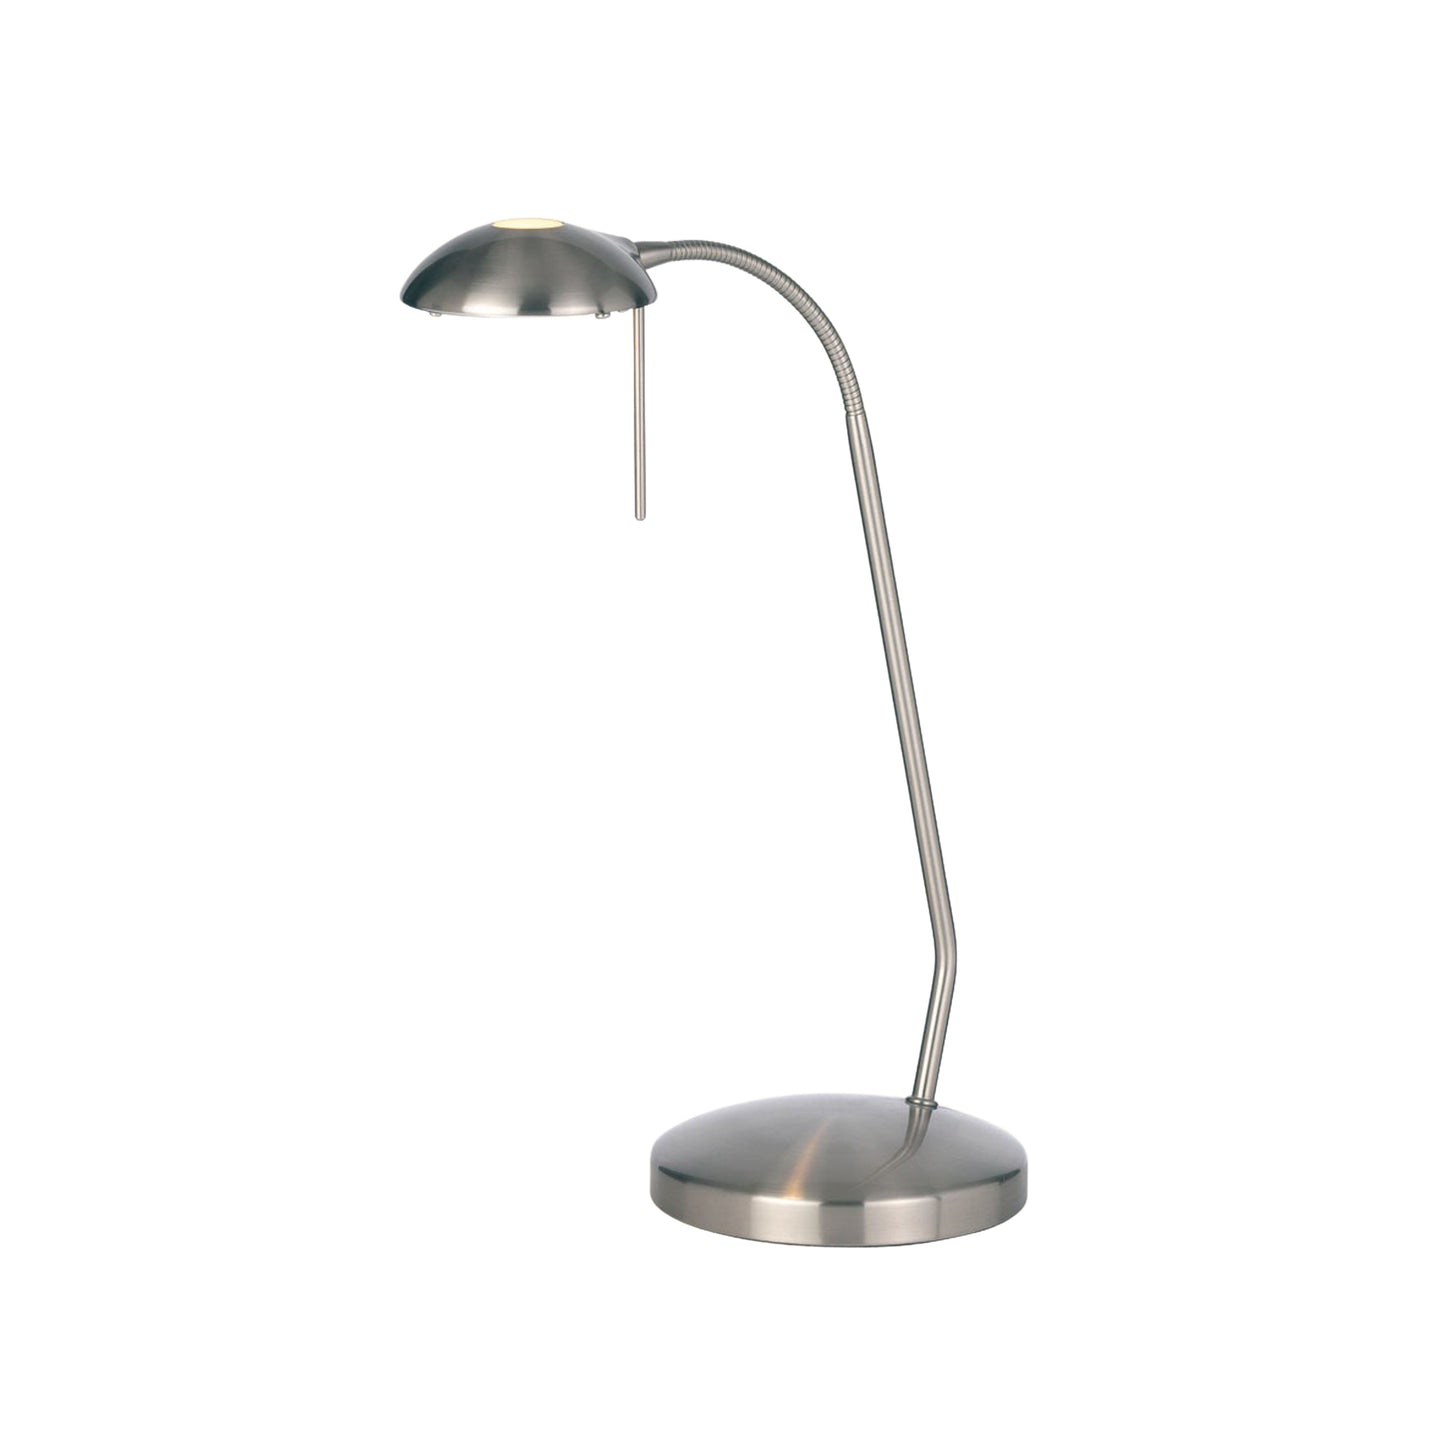 A satin chrome Shaugh Table Lamp with a metal base, perfect for home furniture and interior decor from Kikiathome.co.uk.